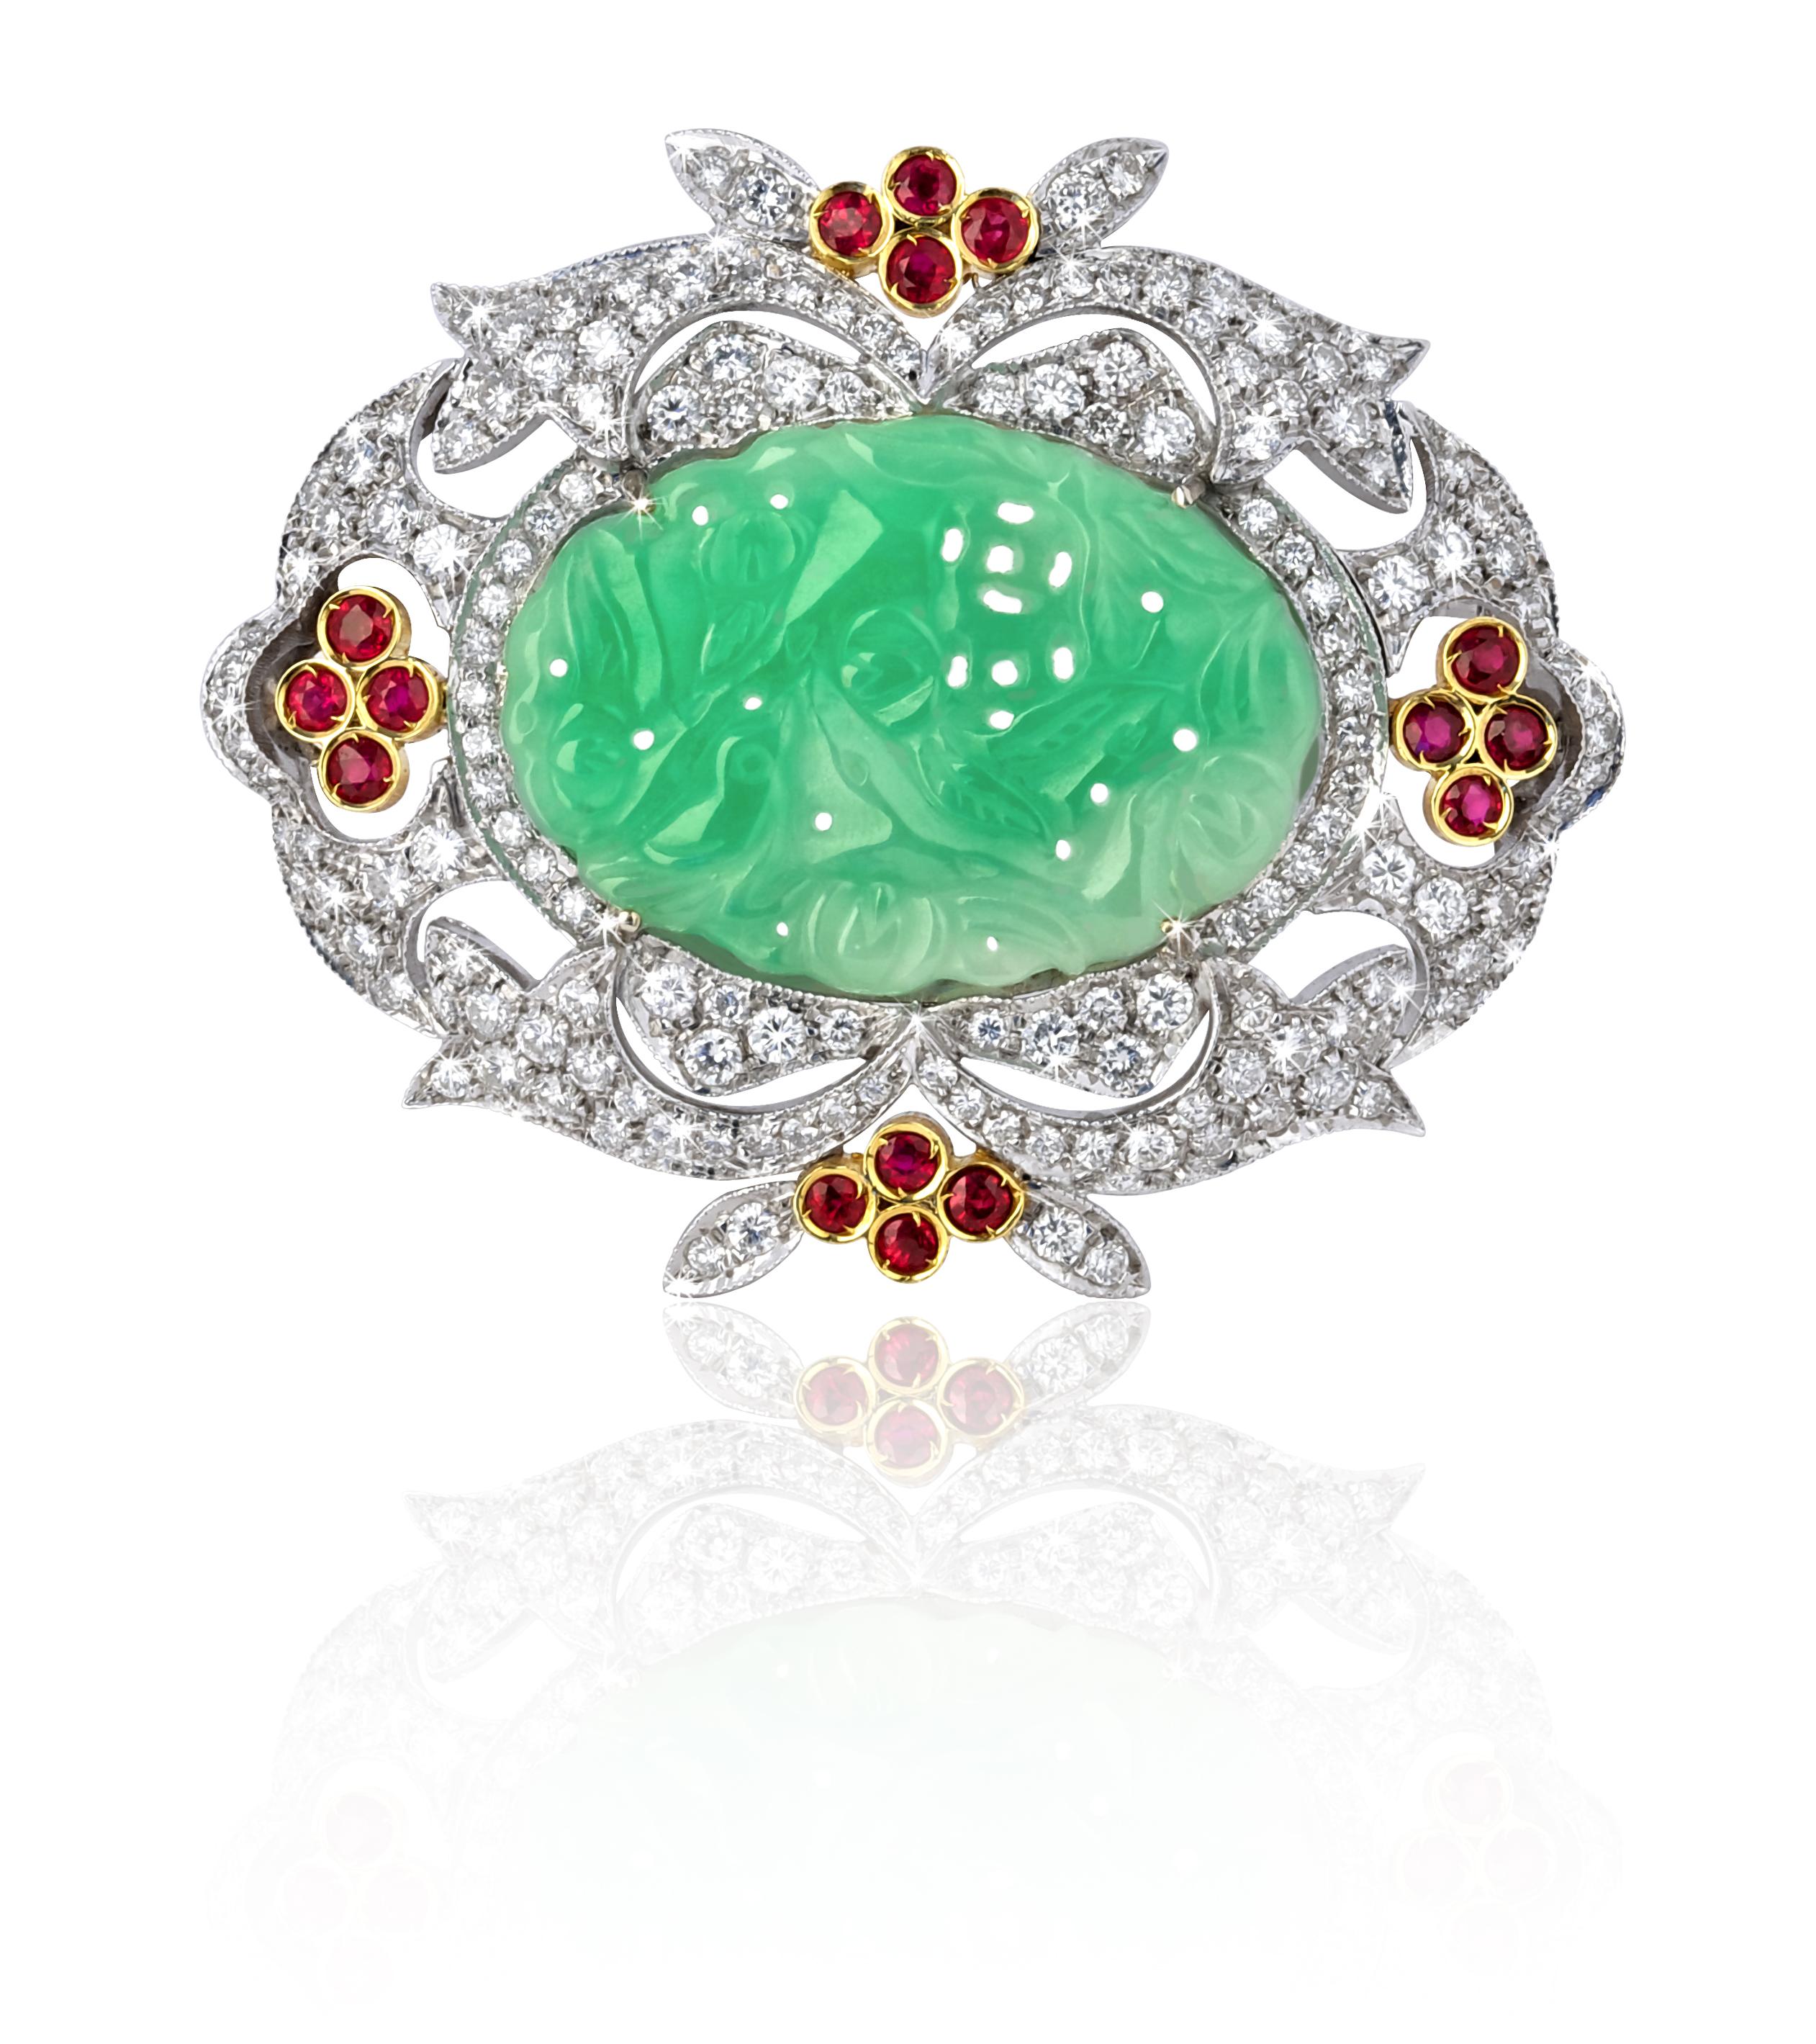 Brilliant Cut Vintage Jade Brooch From ANGELETTI PRIVATE COLLECTION Gold with Diamonds Rubies For Sale